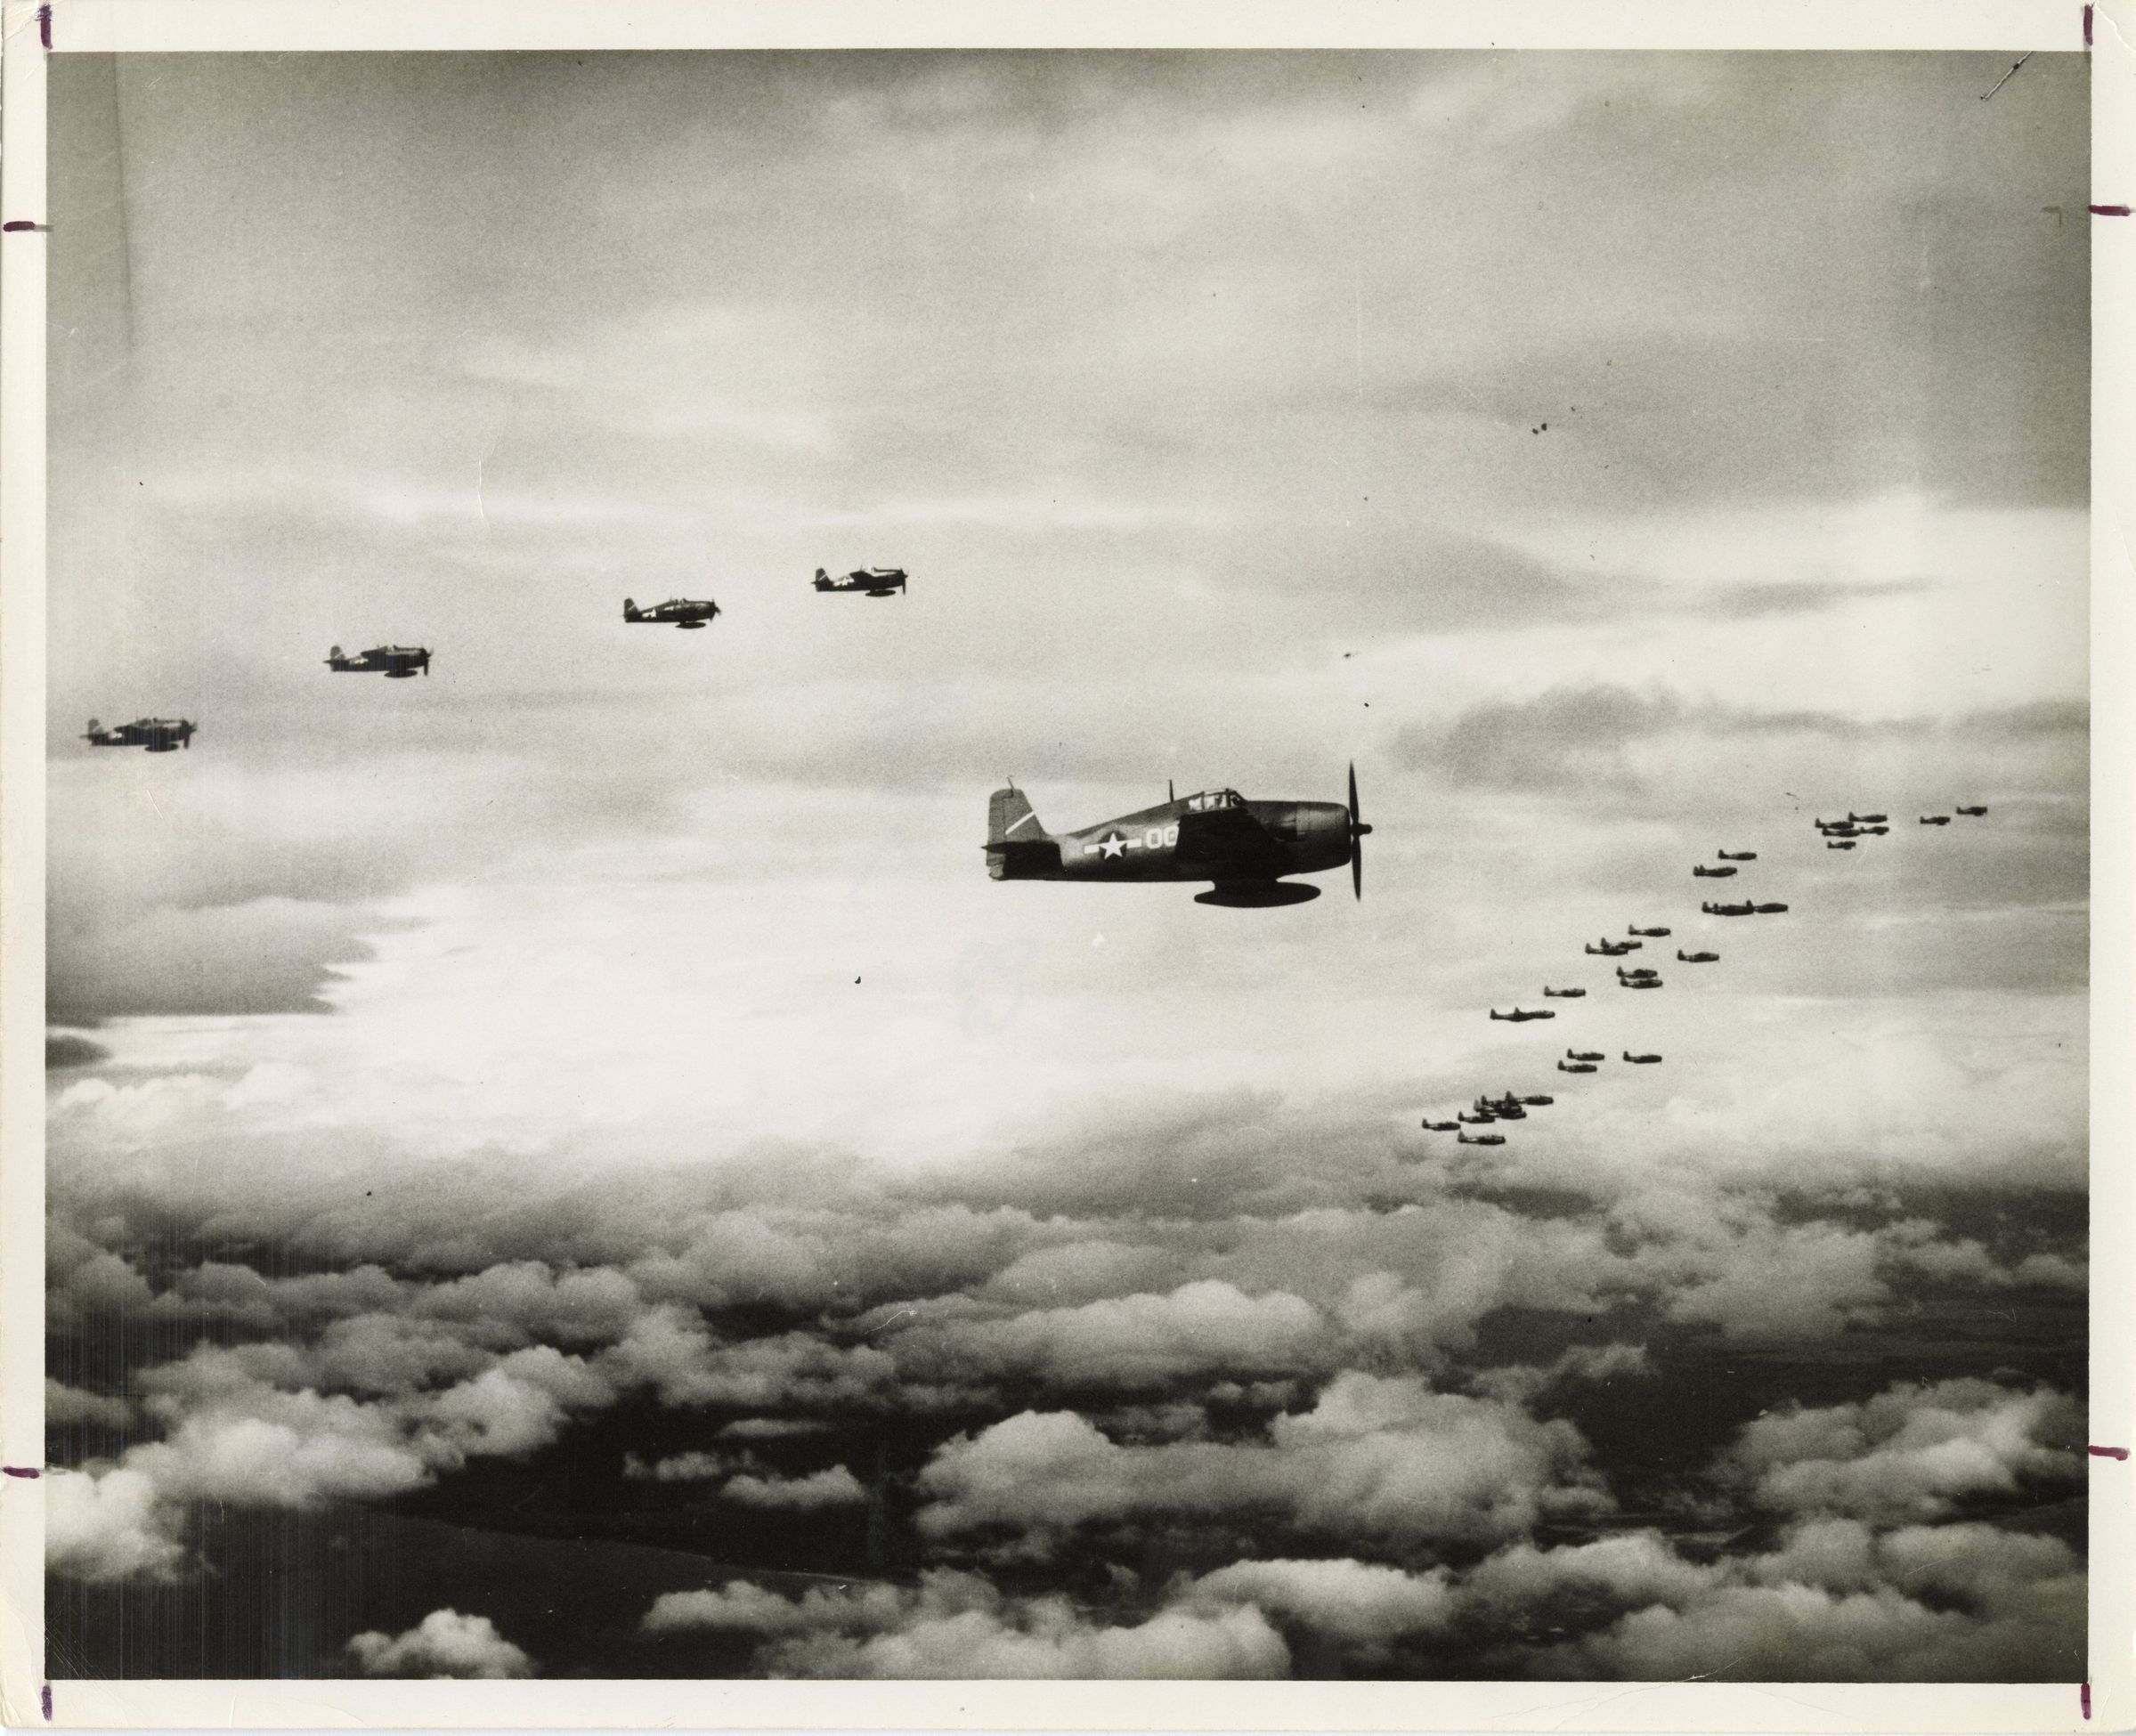 Primary Image of Air Group Five Heading to the Marcus Islands